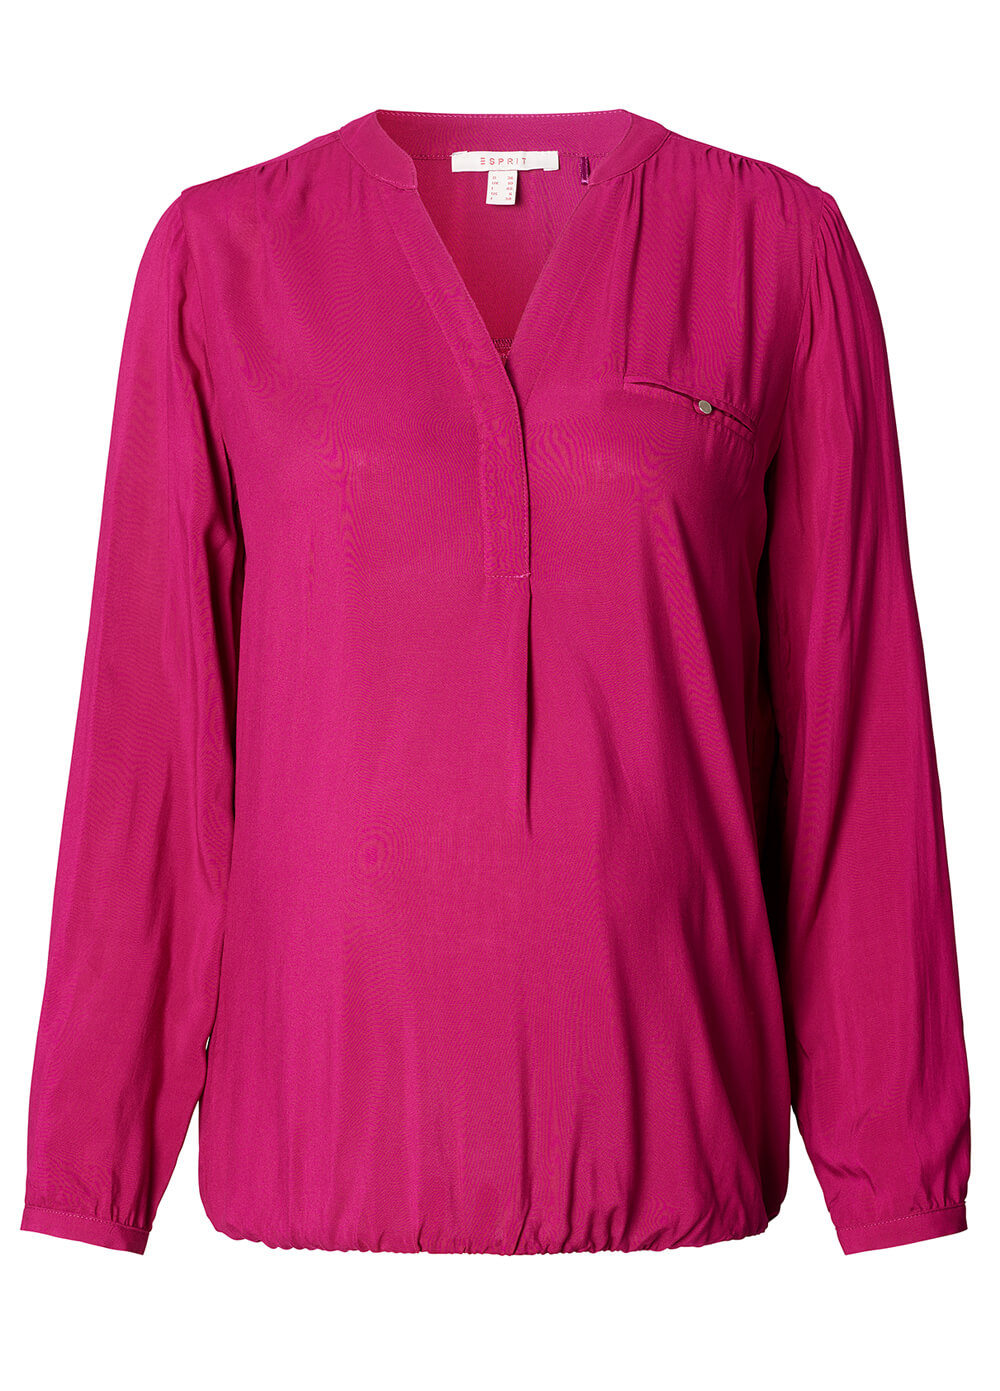 Flowing Viscose Maternity Blouse in Cherry by Esprit